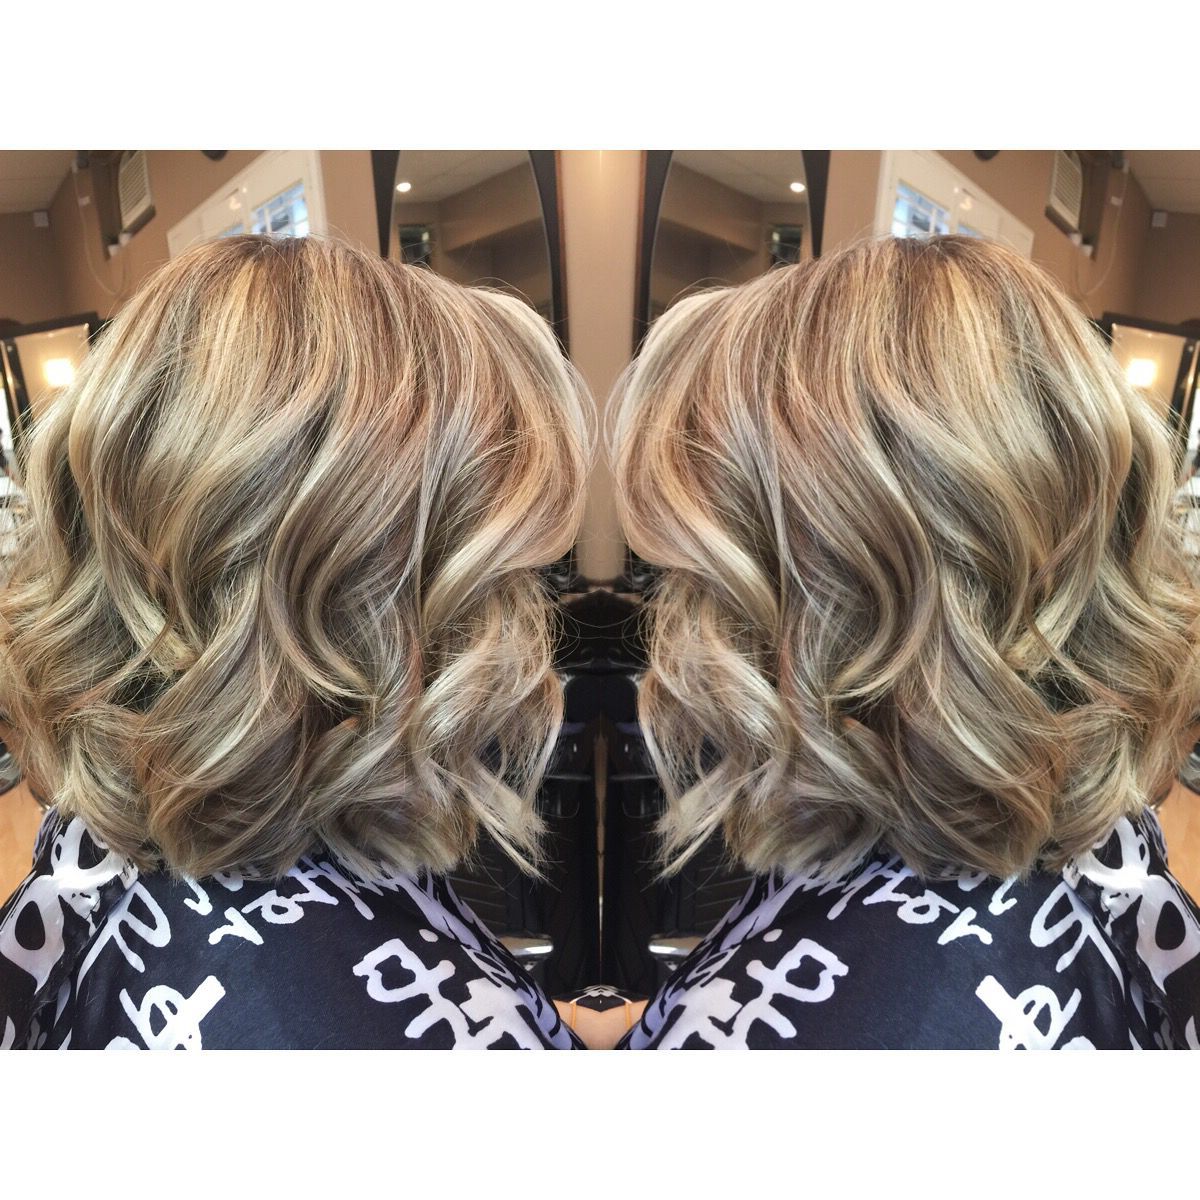 Medium Short Hair Lob With Highlights And Lowlights With A Beach Wave (View 6 of 20)